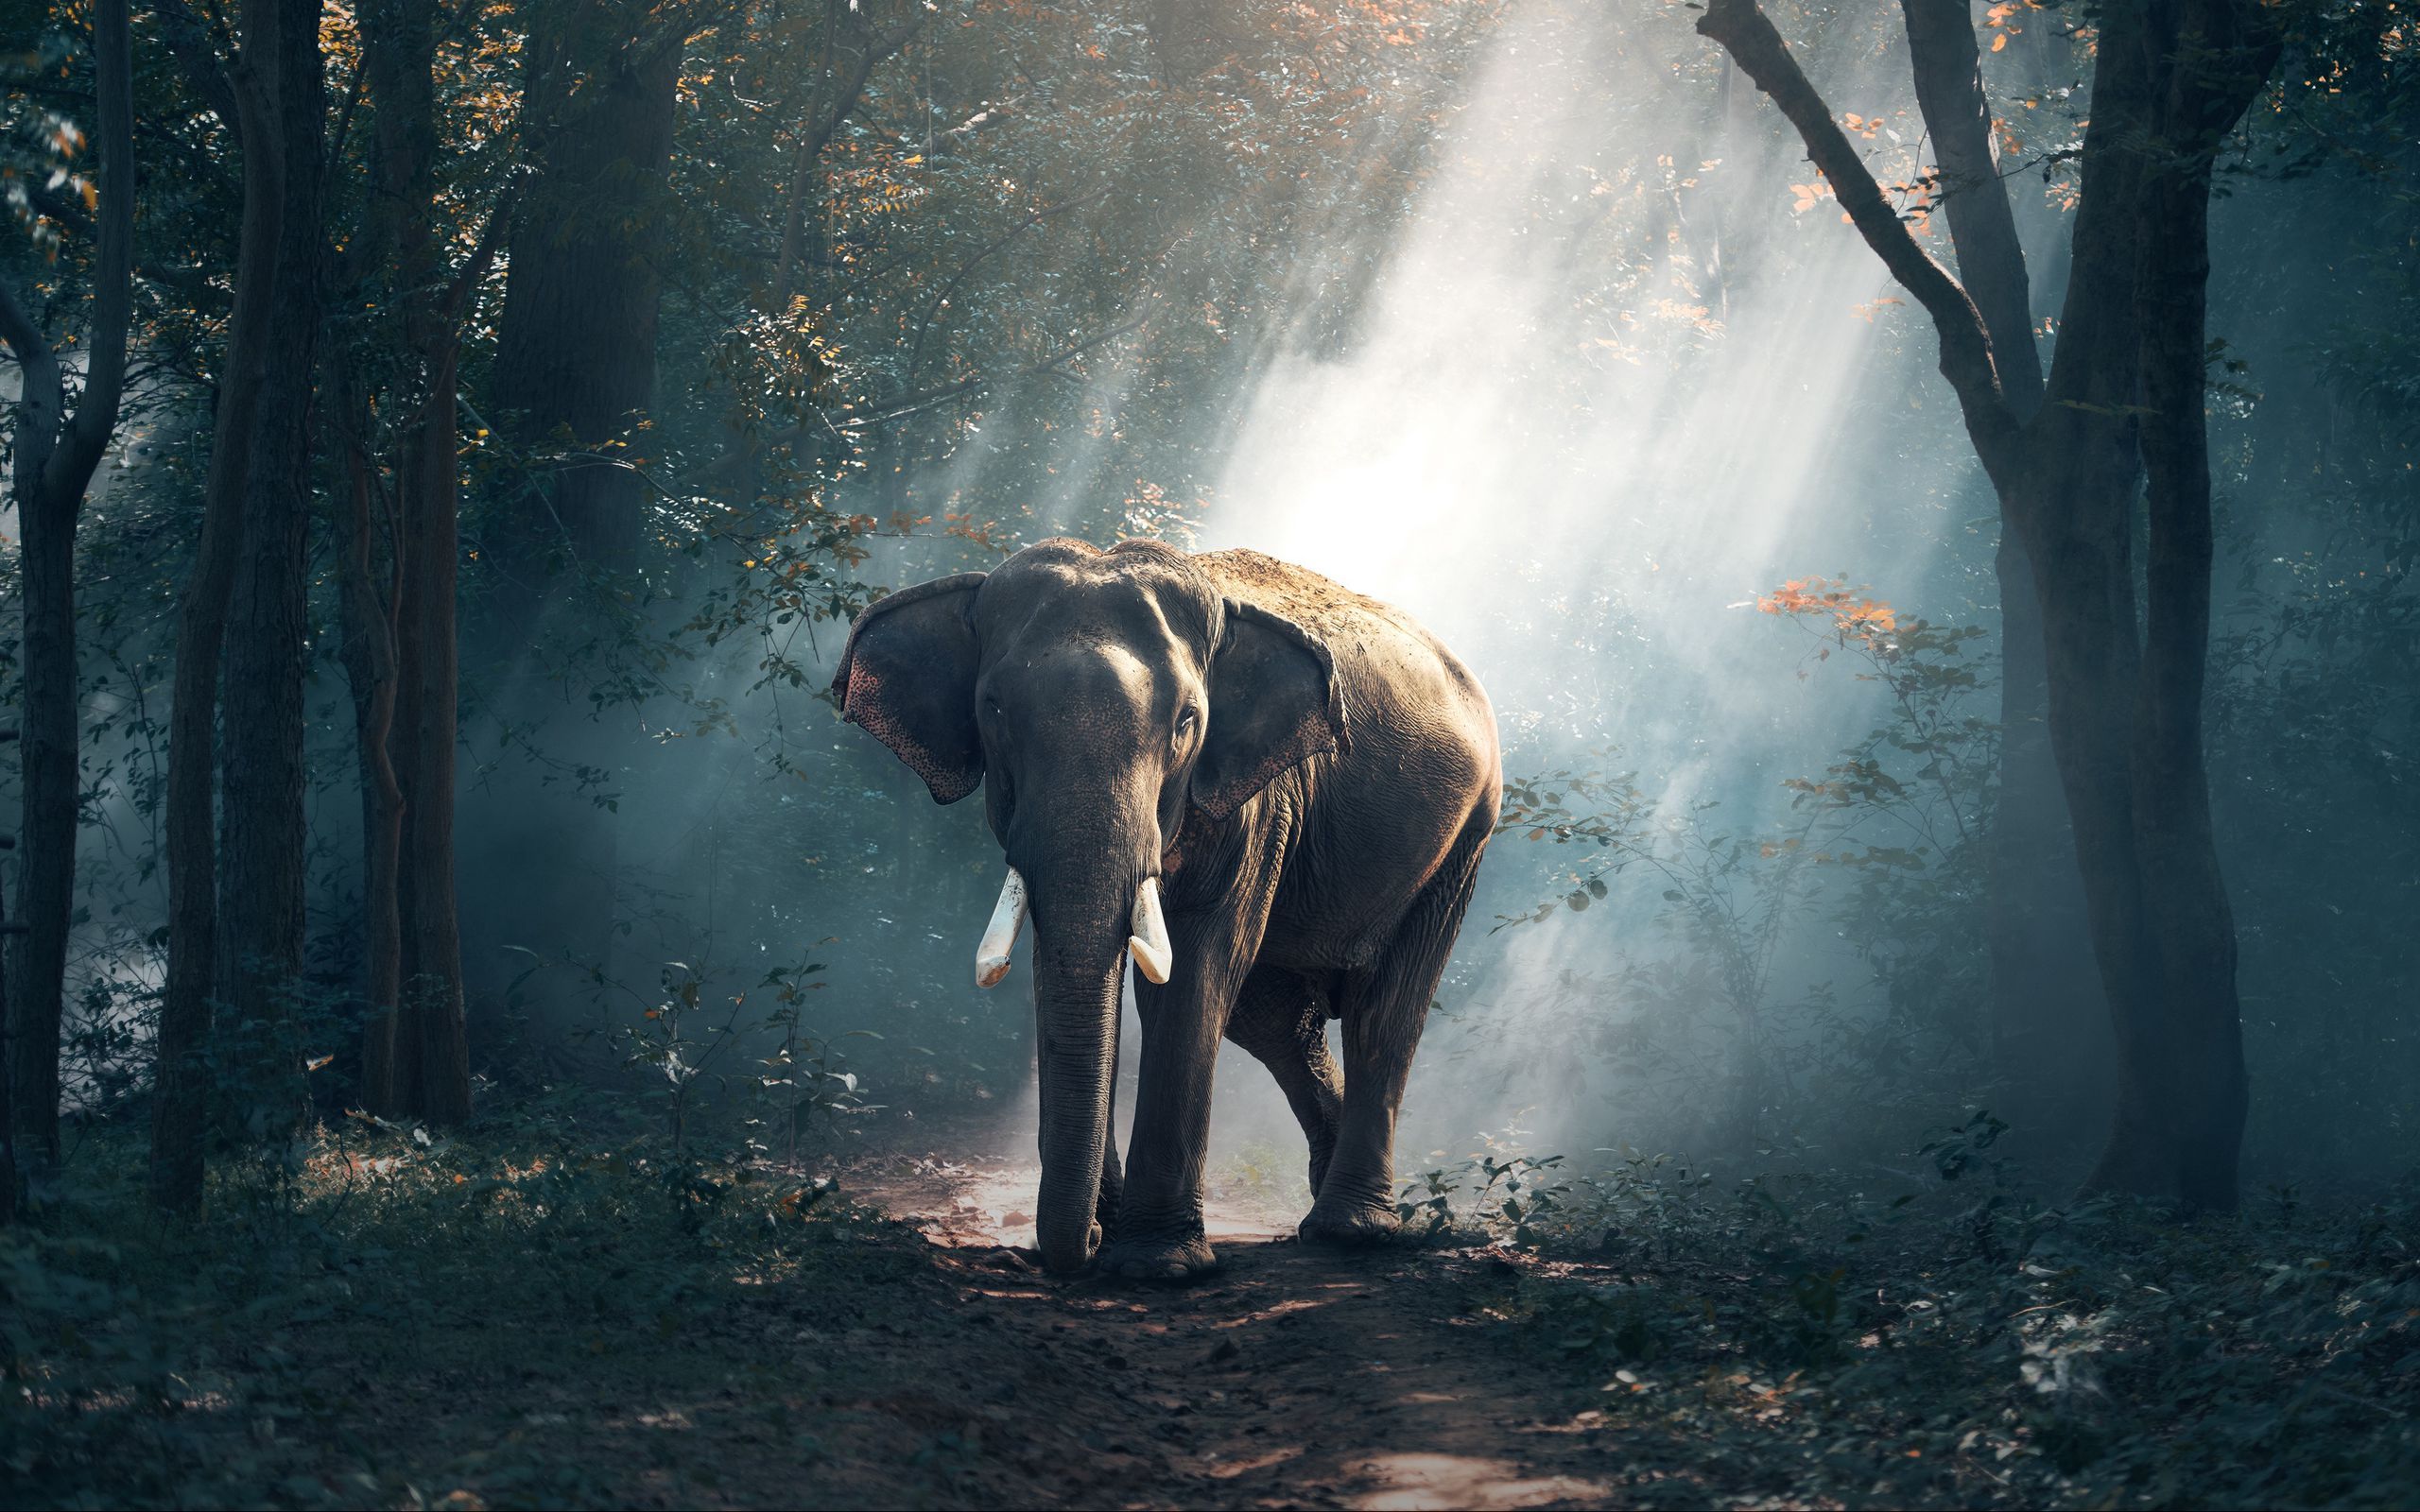 Download wallpaper 2560x1600 elephant, forest, trees, sunlight